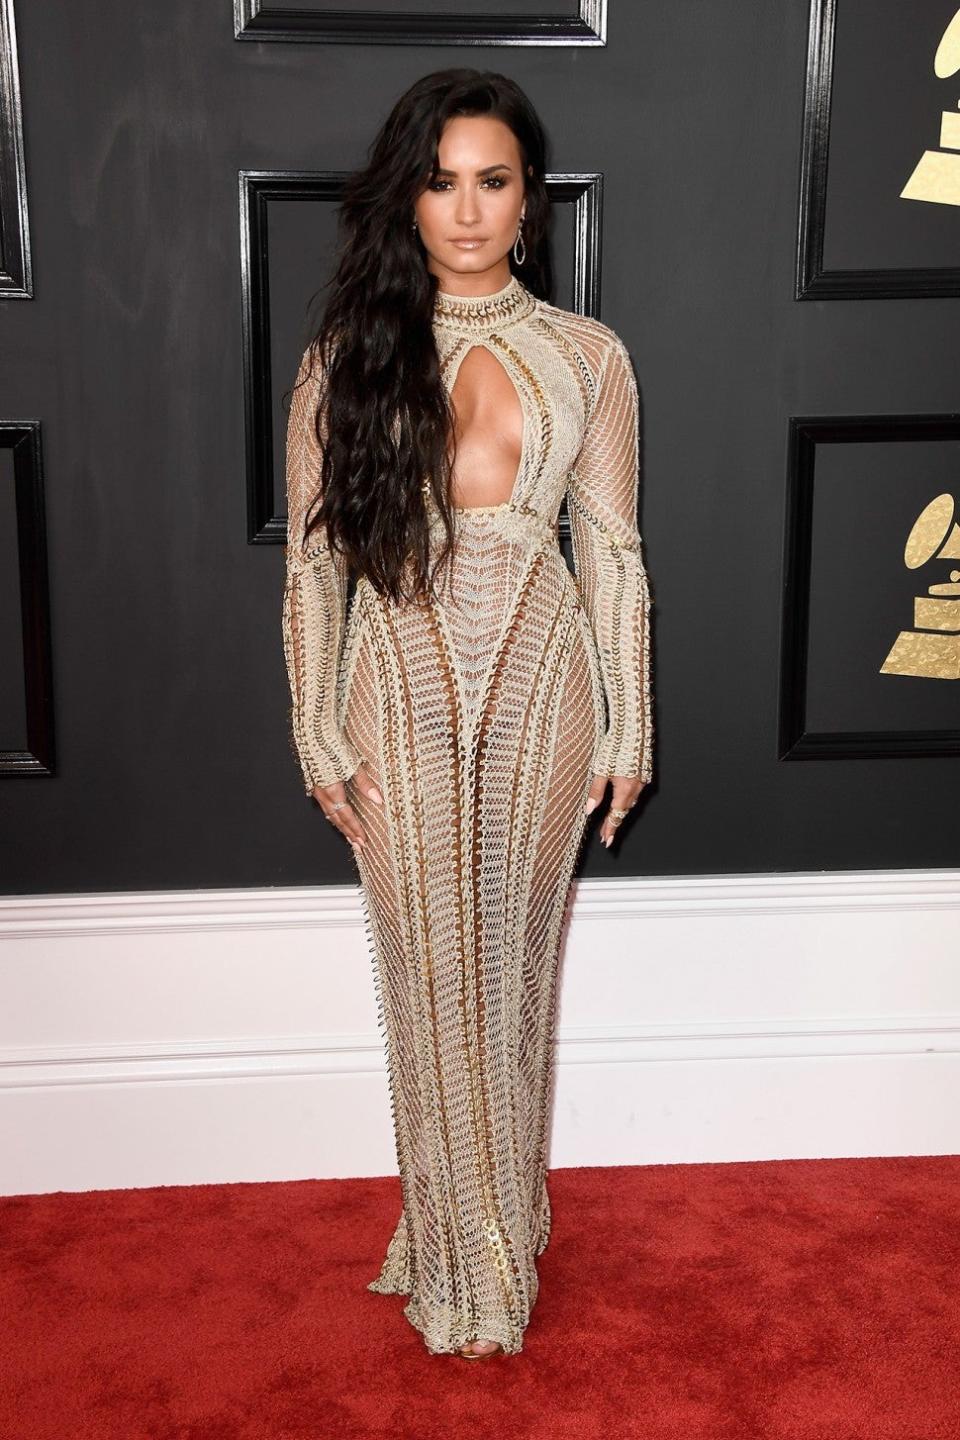 ET's breaking down all of the singer's GRAMMY red carpet looks, ahead of her highly-anticipated performance at the show on Sunday.